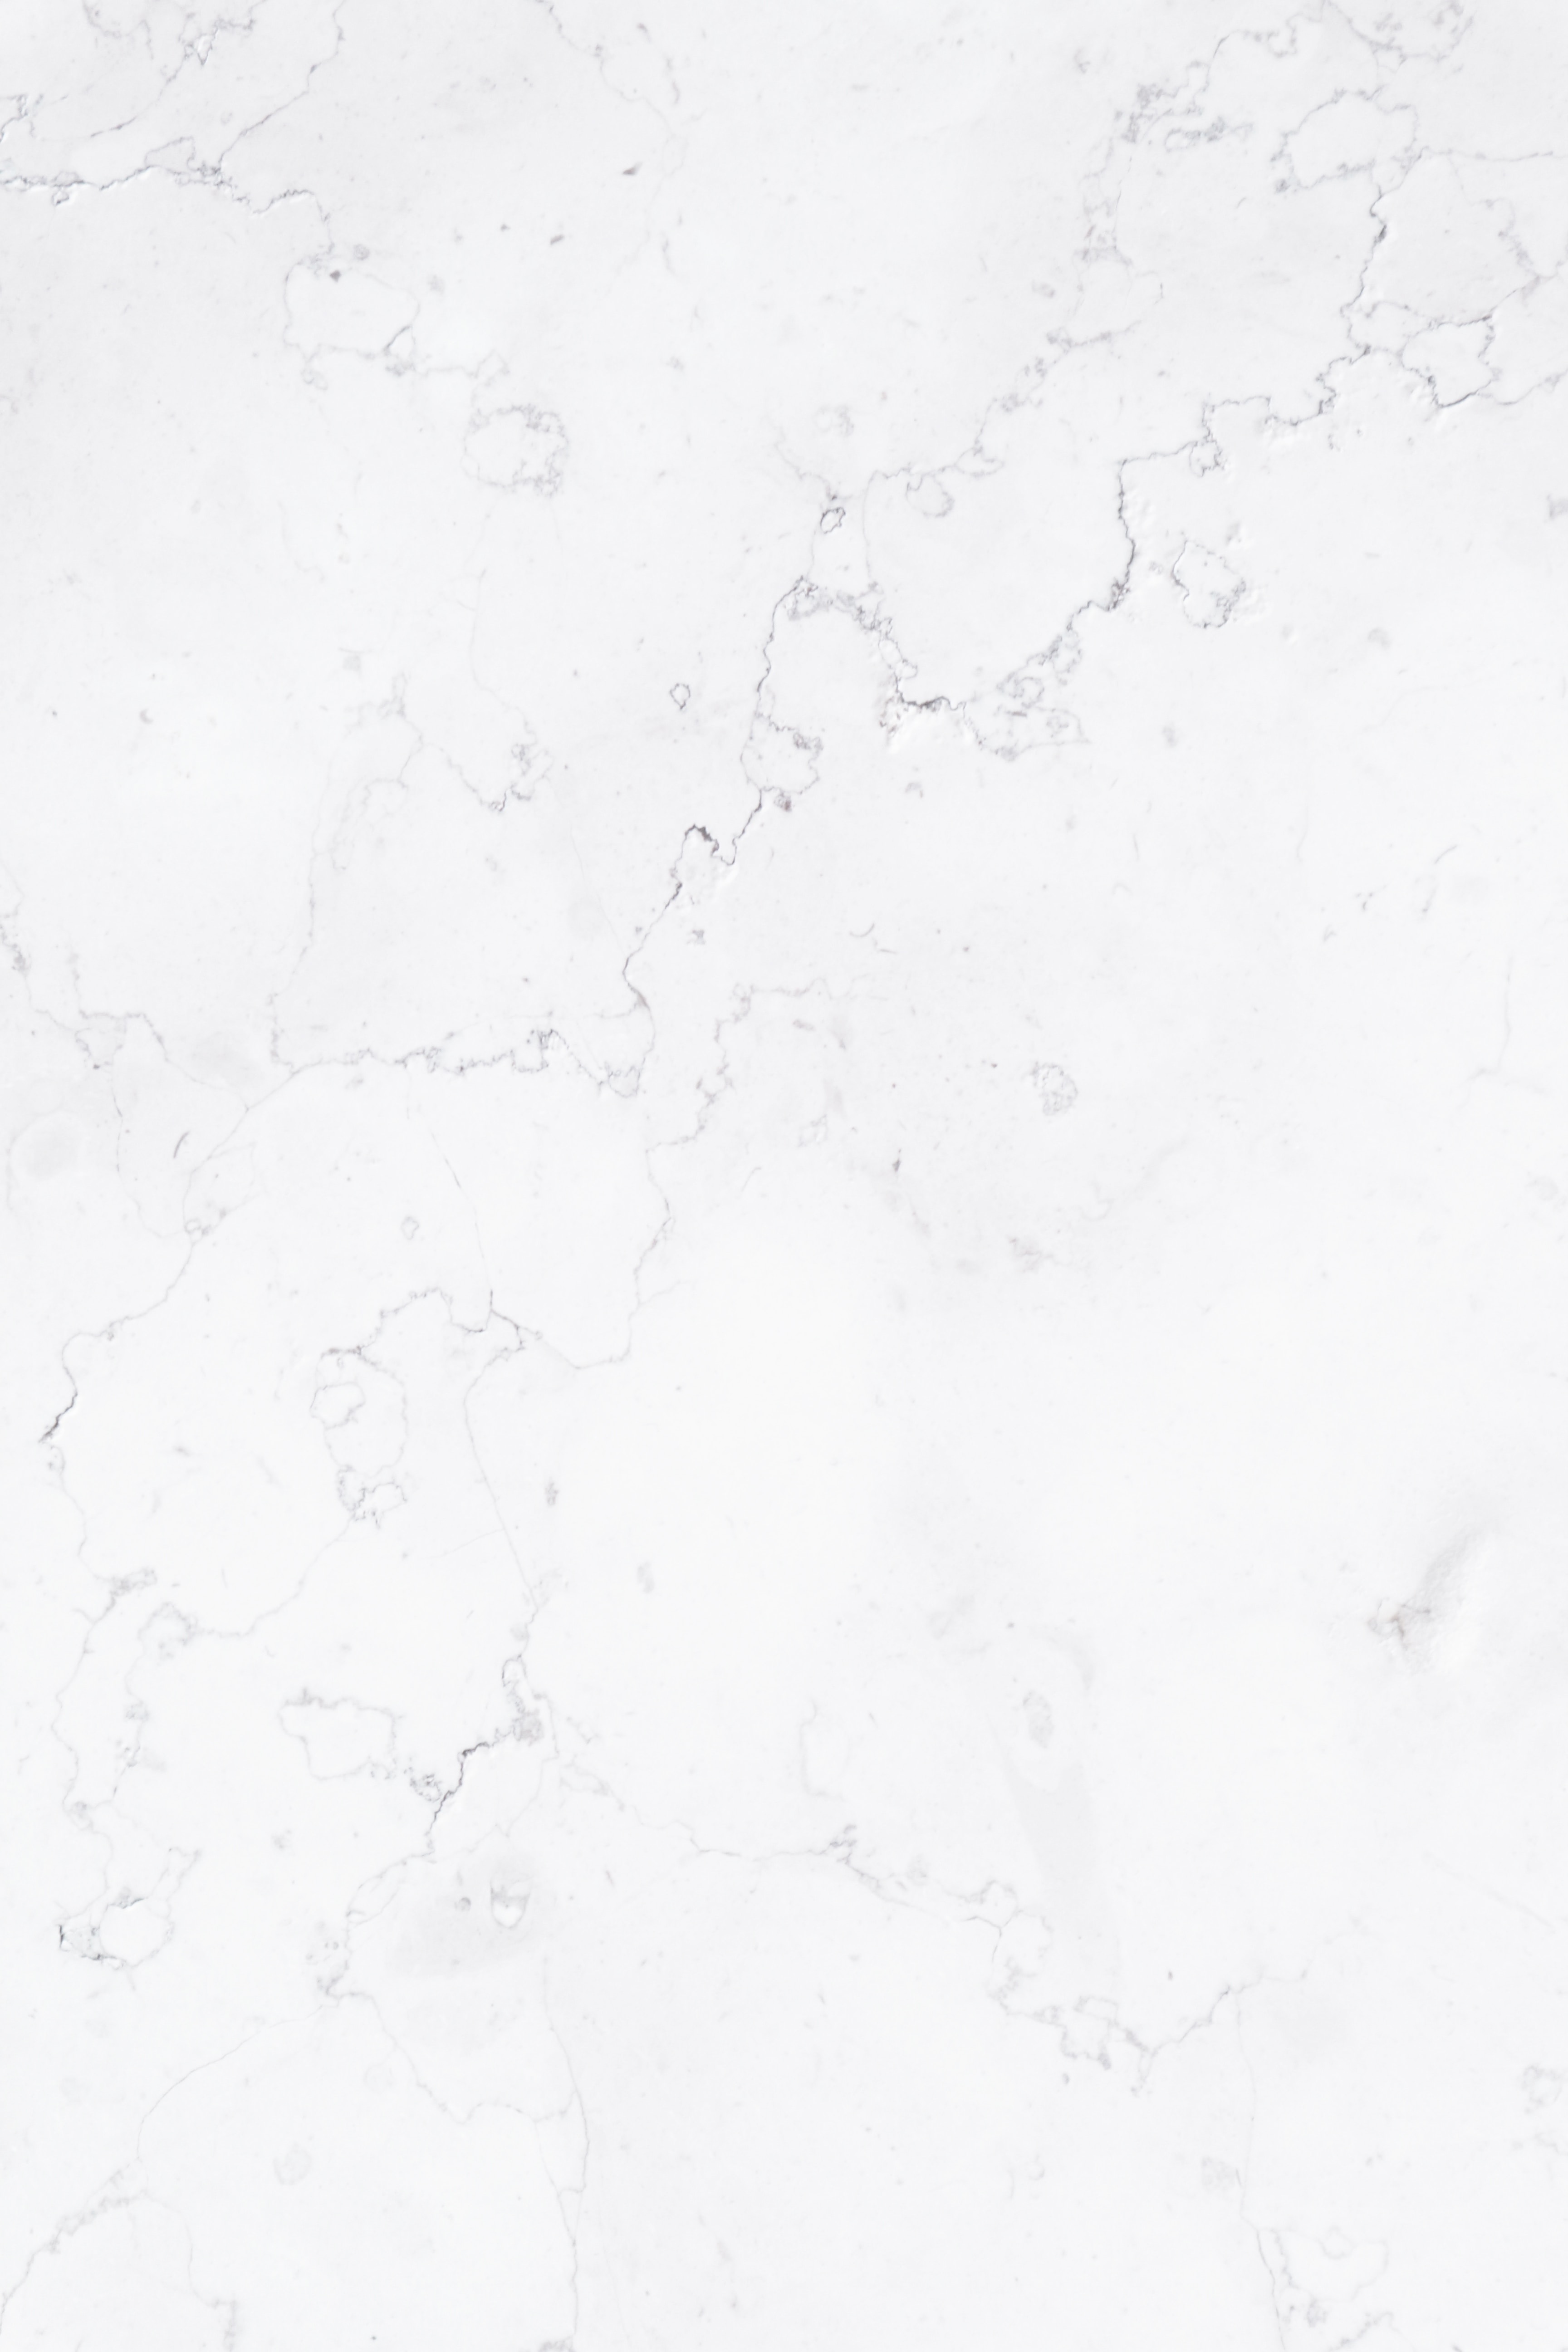 texture, white, textures, marble Full HD